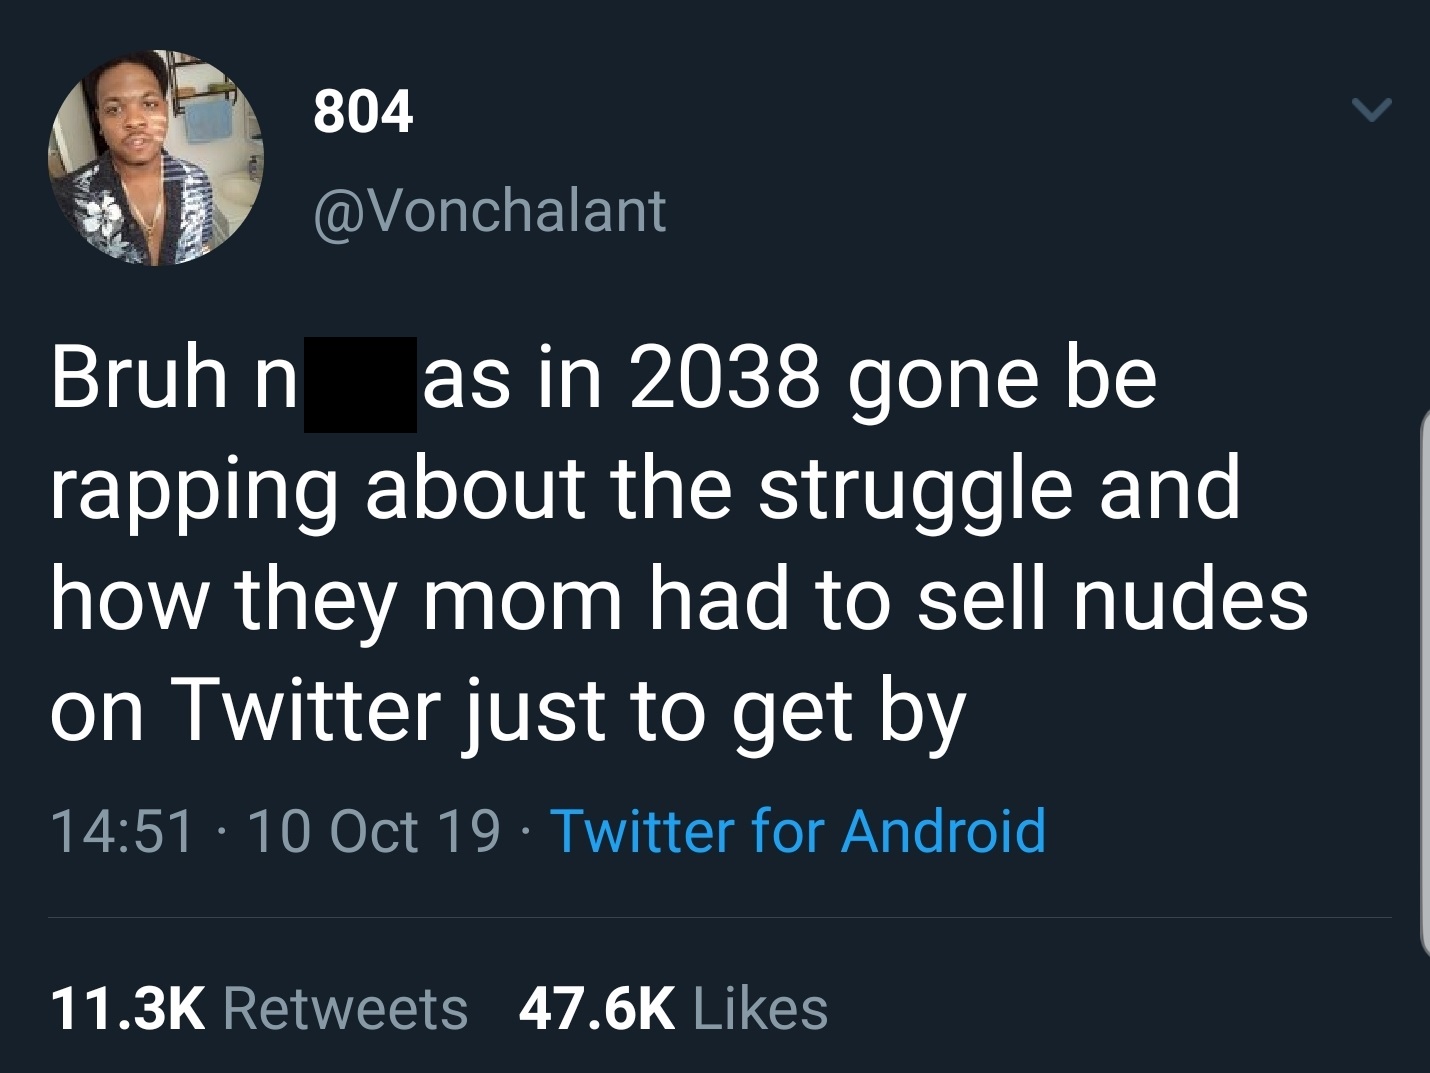 Bruh n as in 2038 gone be rapping about the struggle and how they mom had to sell nudes on Twitter just to get by 10 Oct 19 Twitter for Android